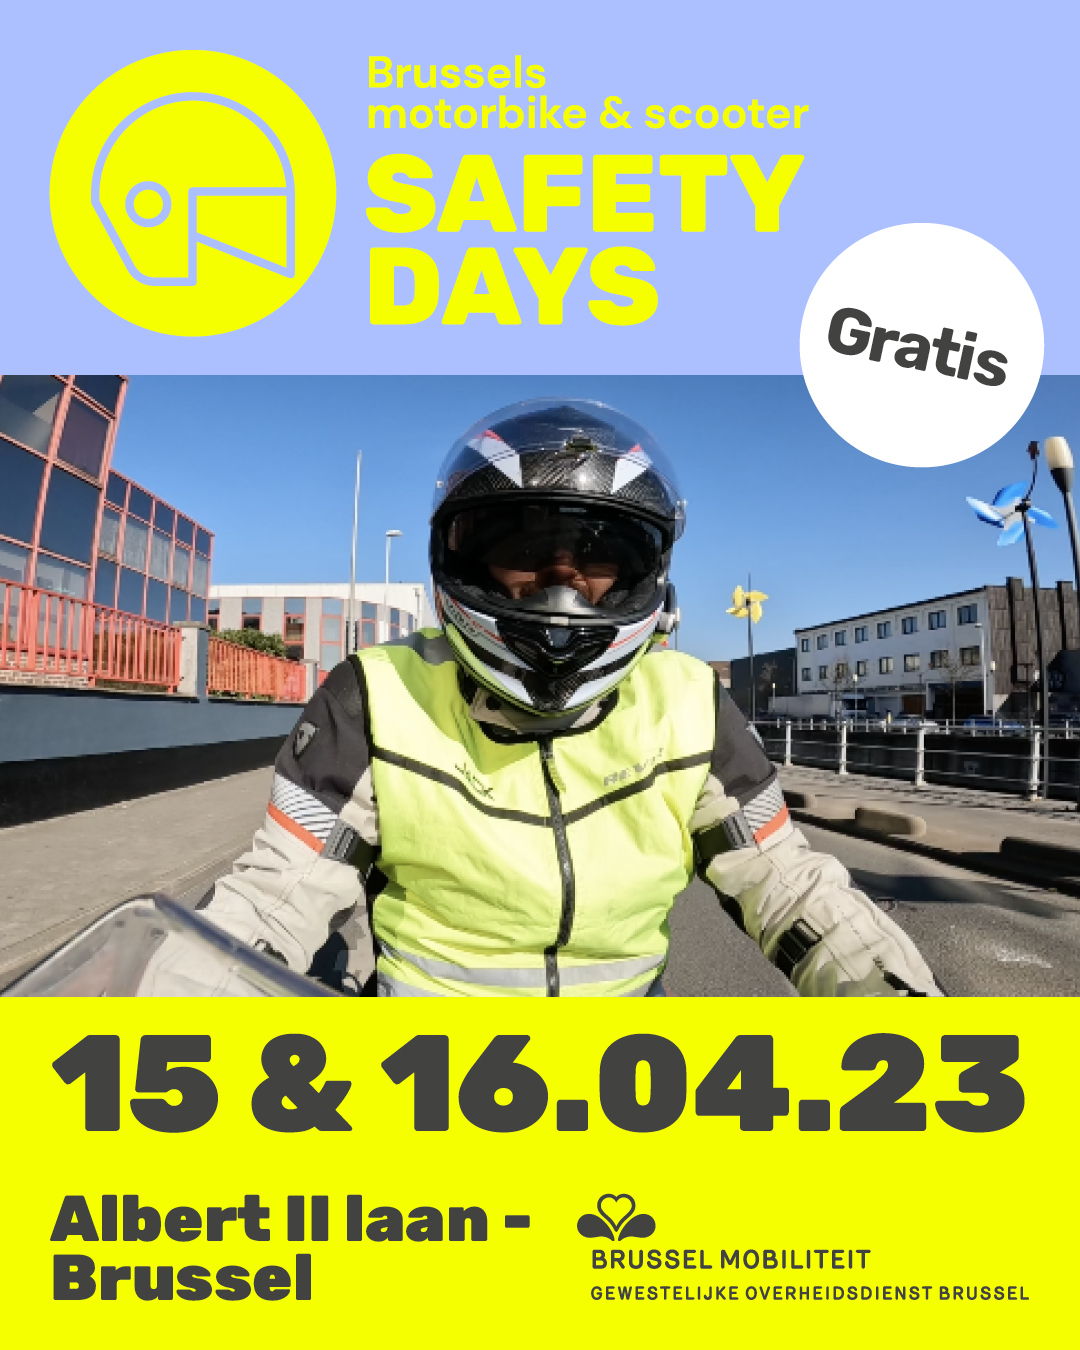 Brussels Motorbike & Scooter Safety Days